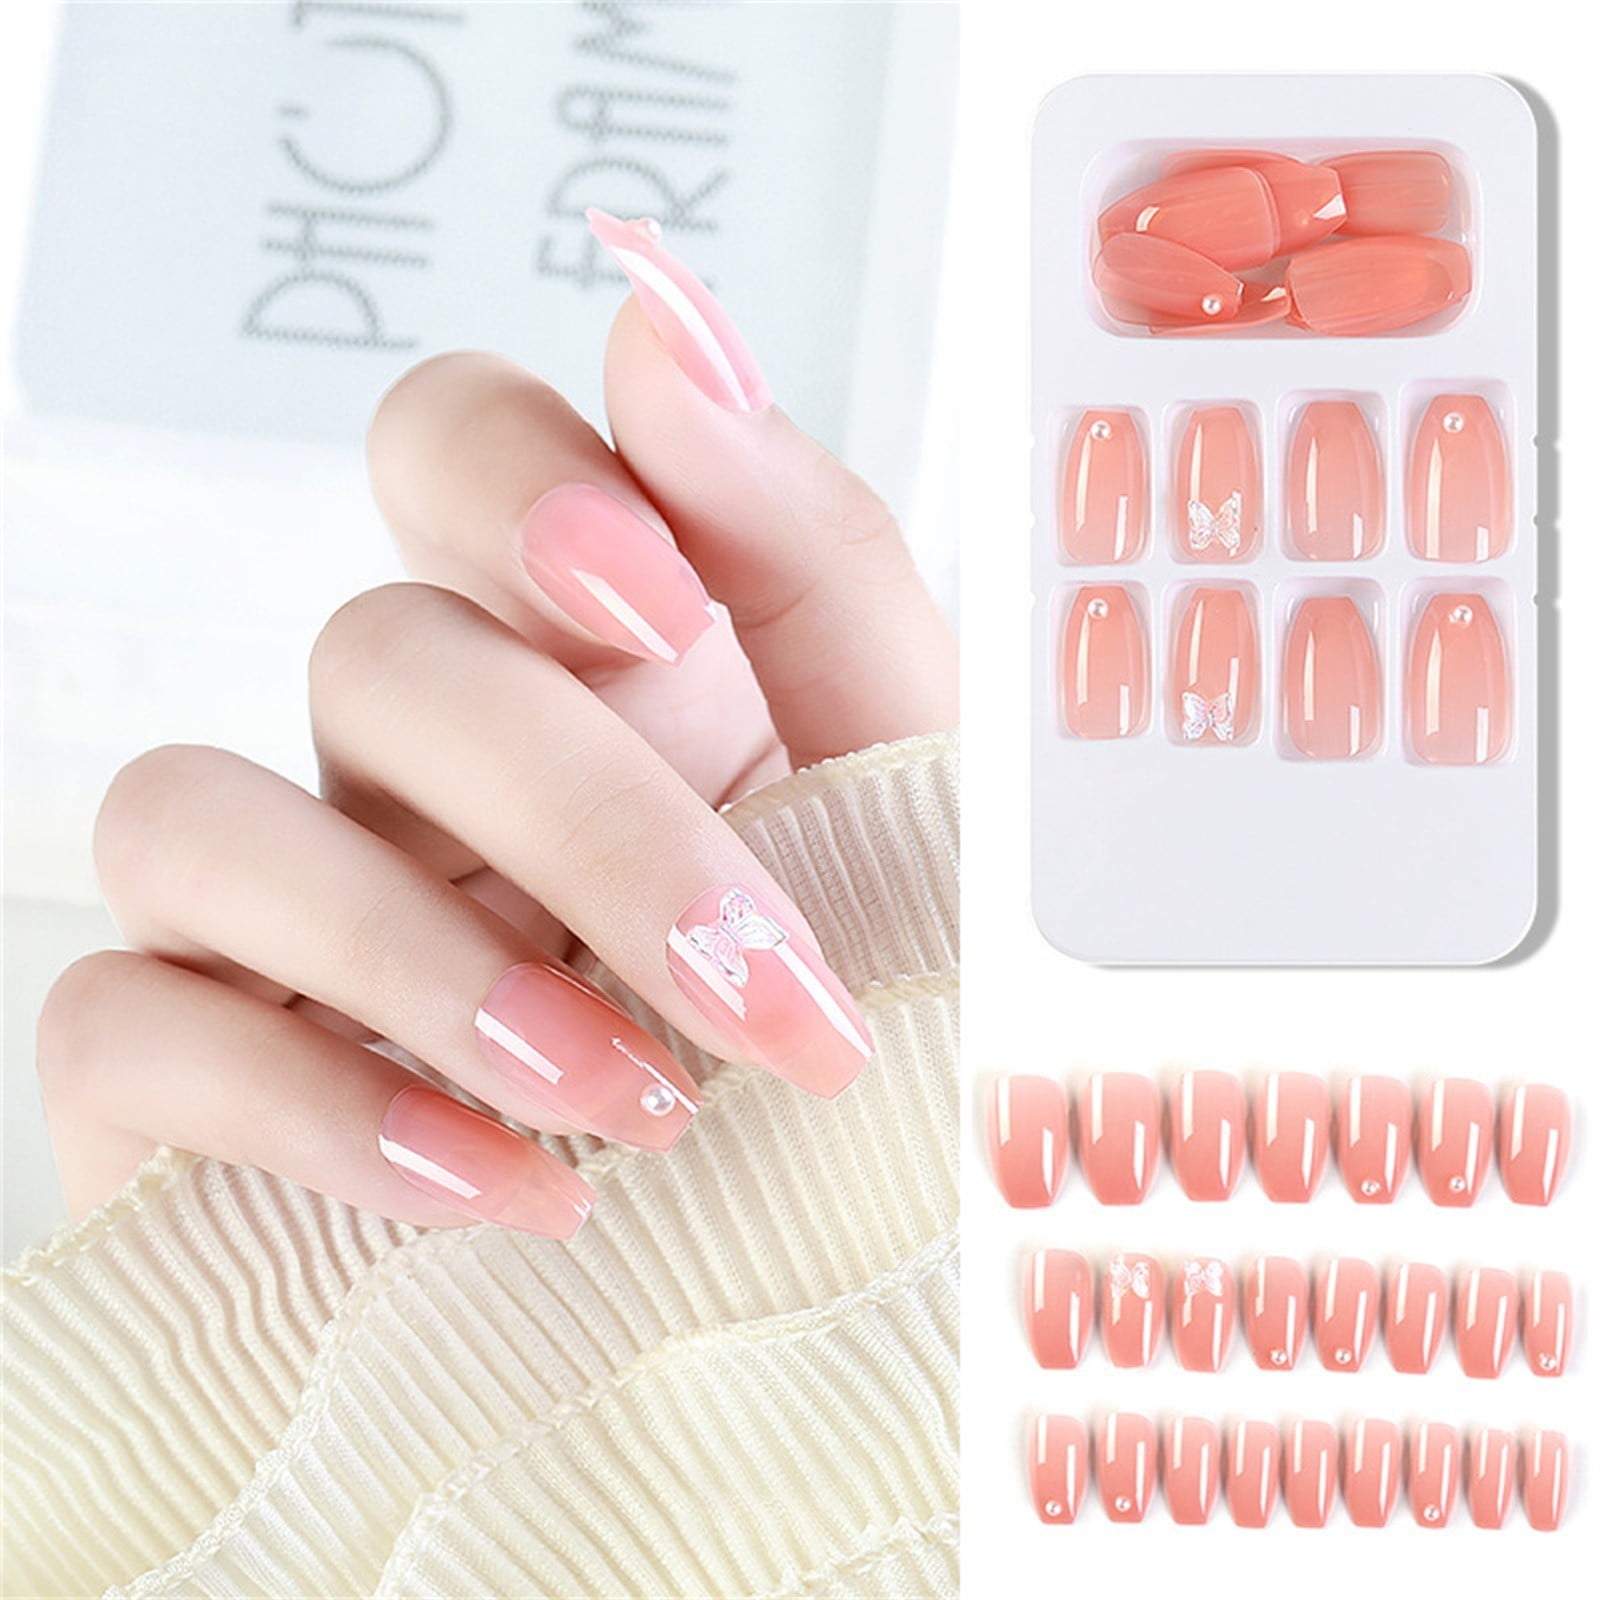 PRO ROOP Nail Art Kit 16 in 1 - Acrylic Powder with Professional Liquid  Monomer For Nail Extension Acrylic Nail Brush : Amazon.in: Beauty